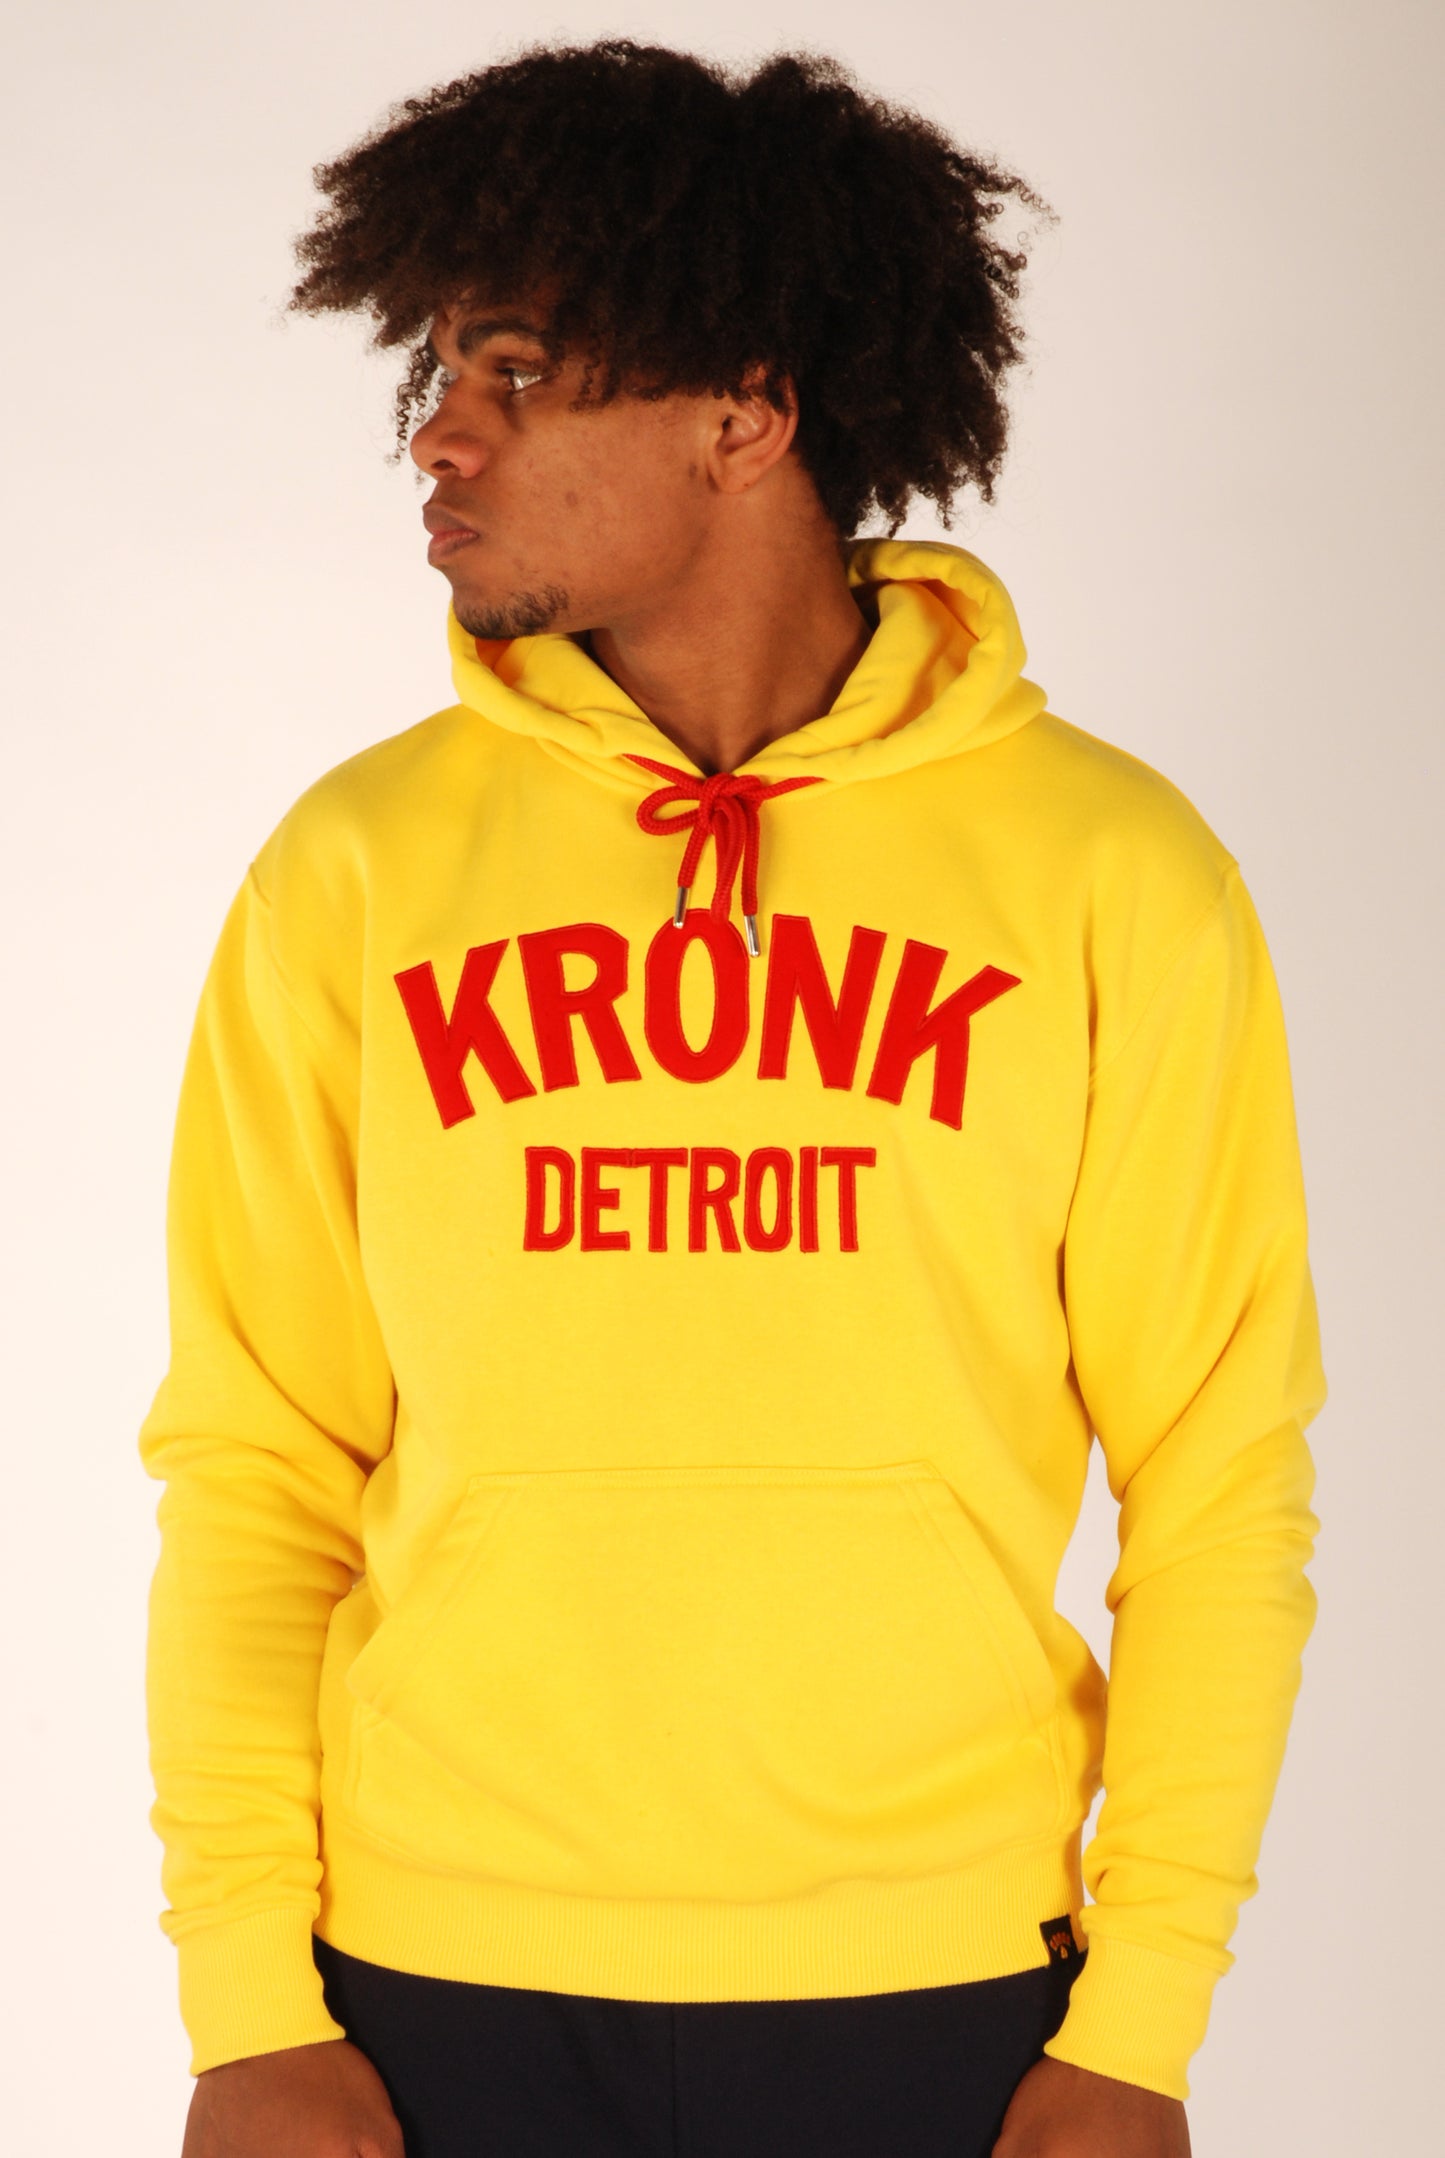 KRONK Detroit Applique Hoodie Regular Fit Yellow with Red logo